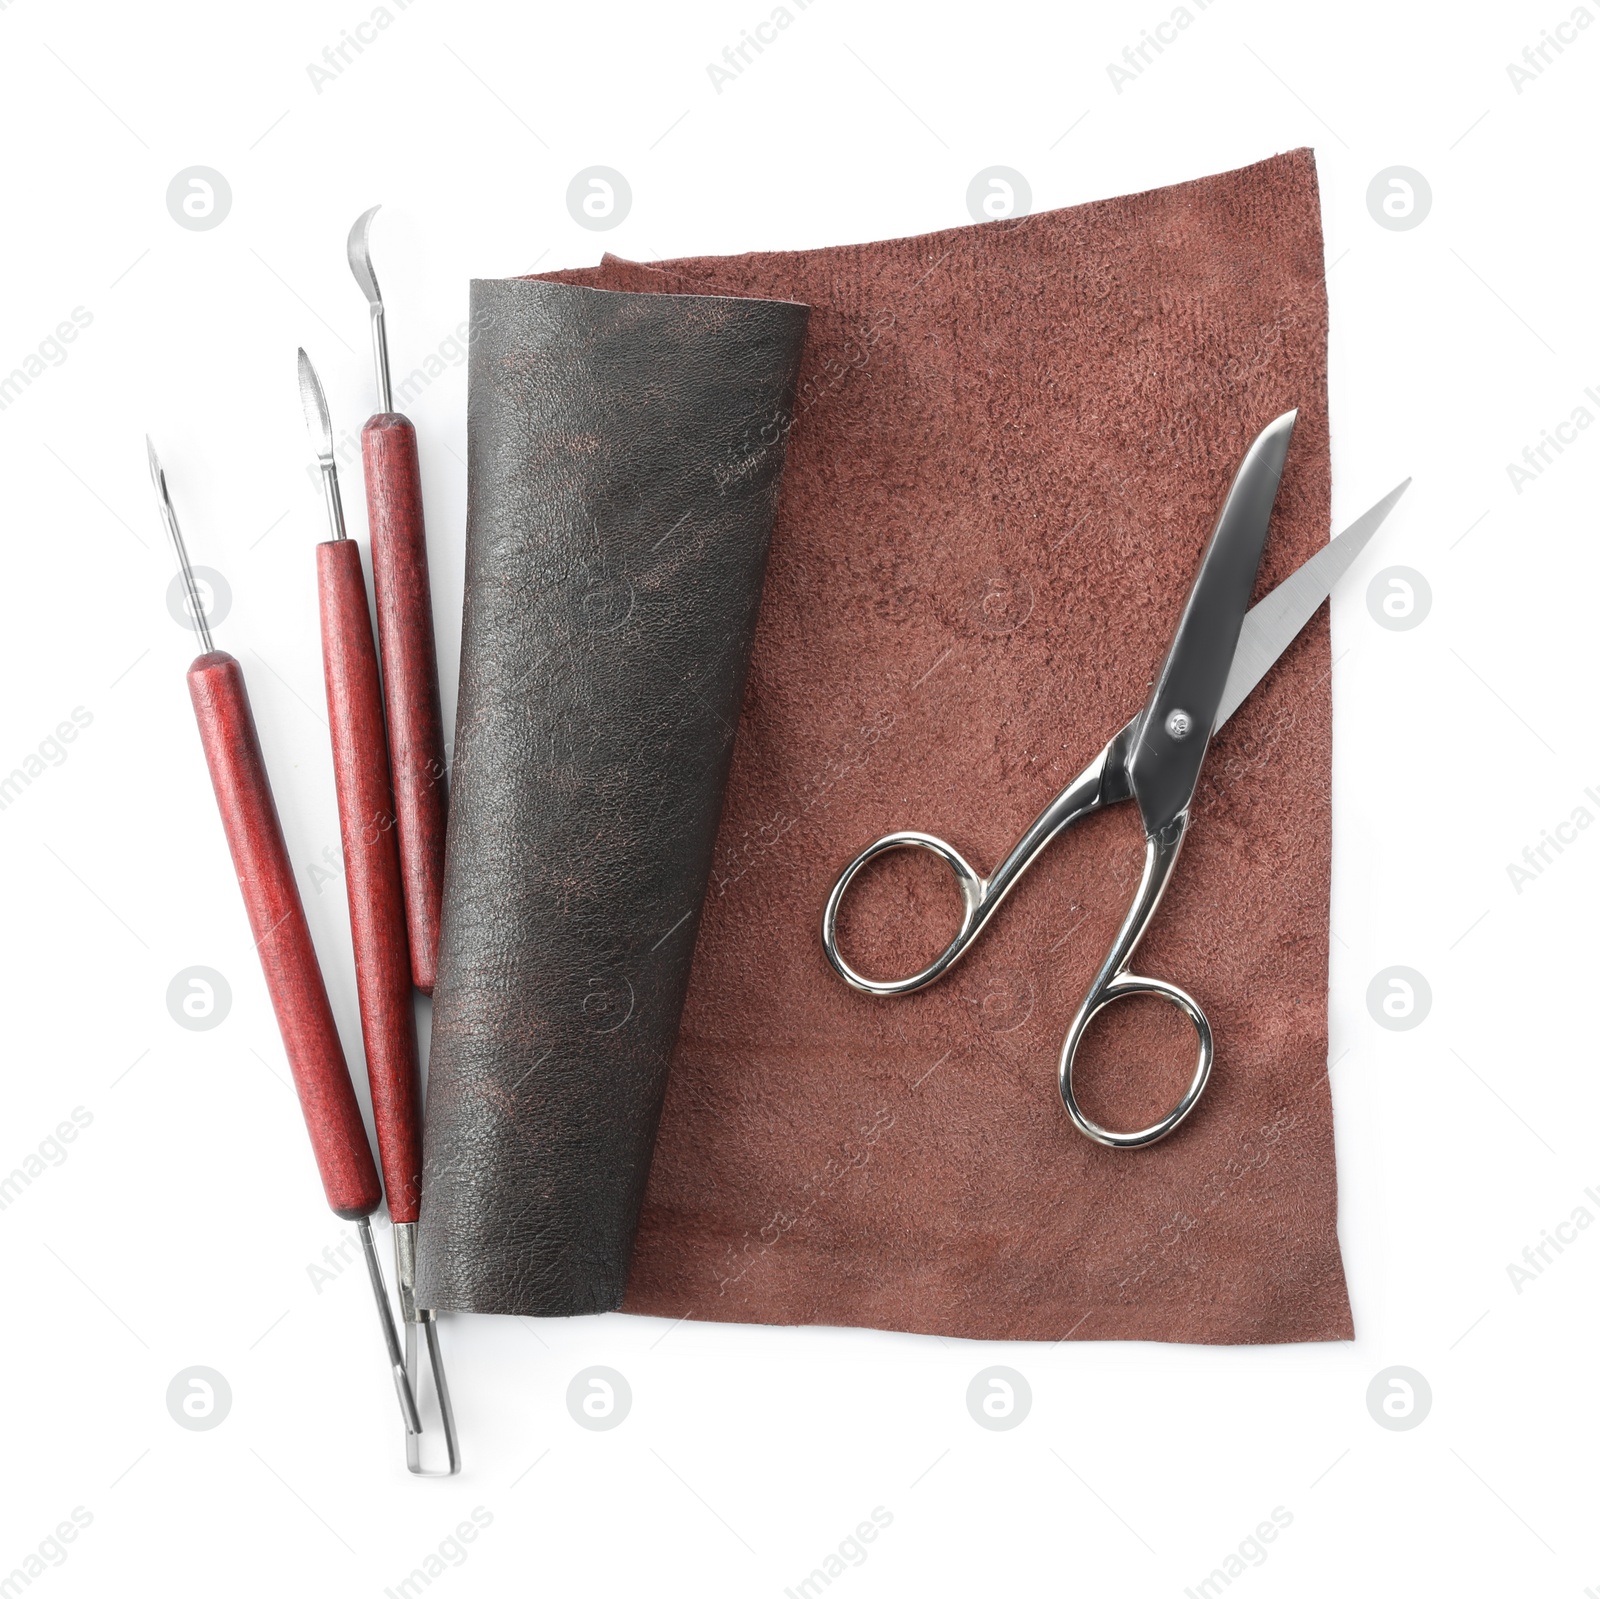 Photo of Leather sample and craftsman tools isolated on white, top view